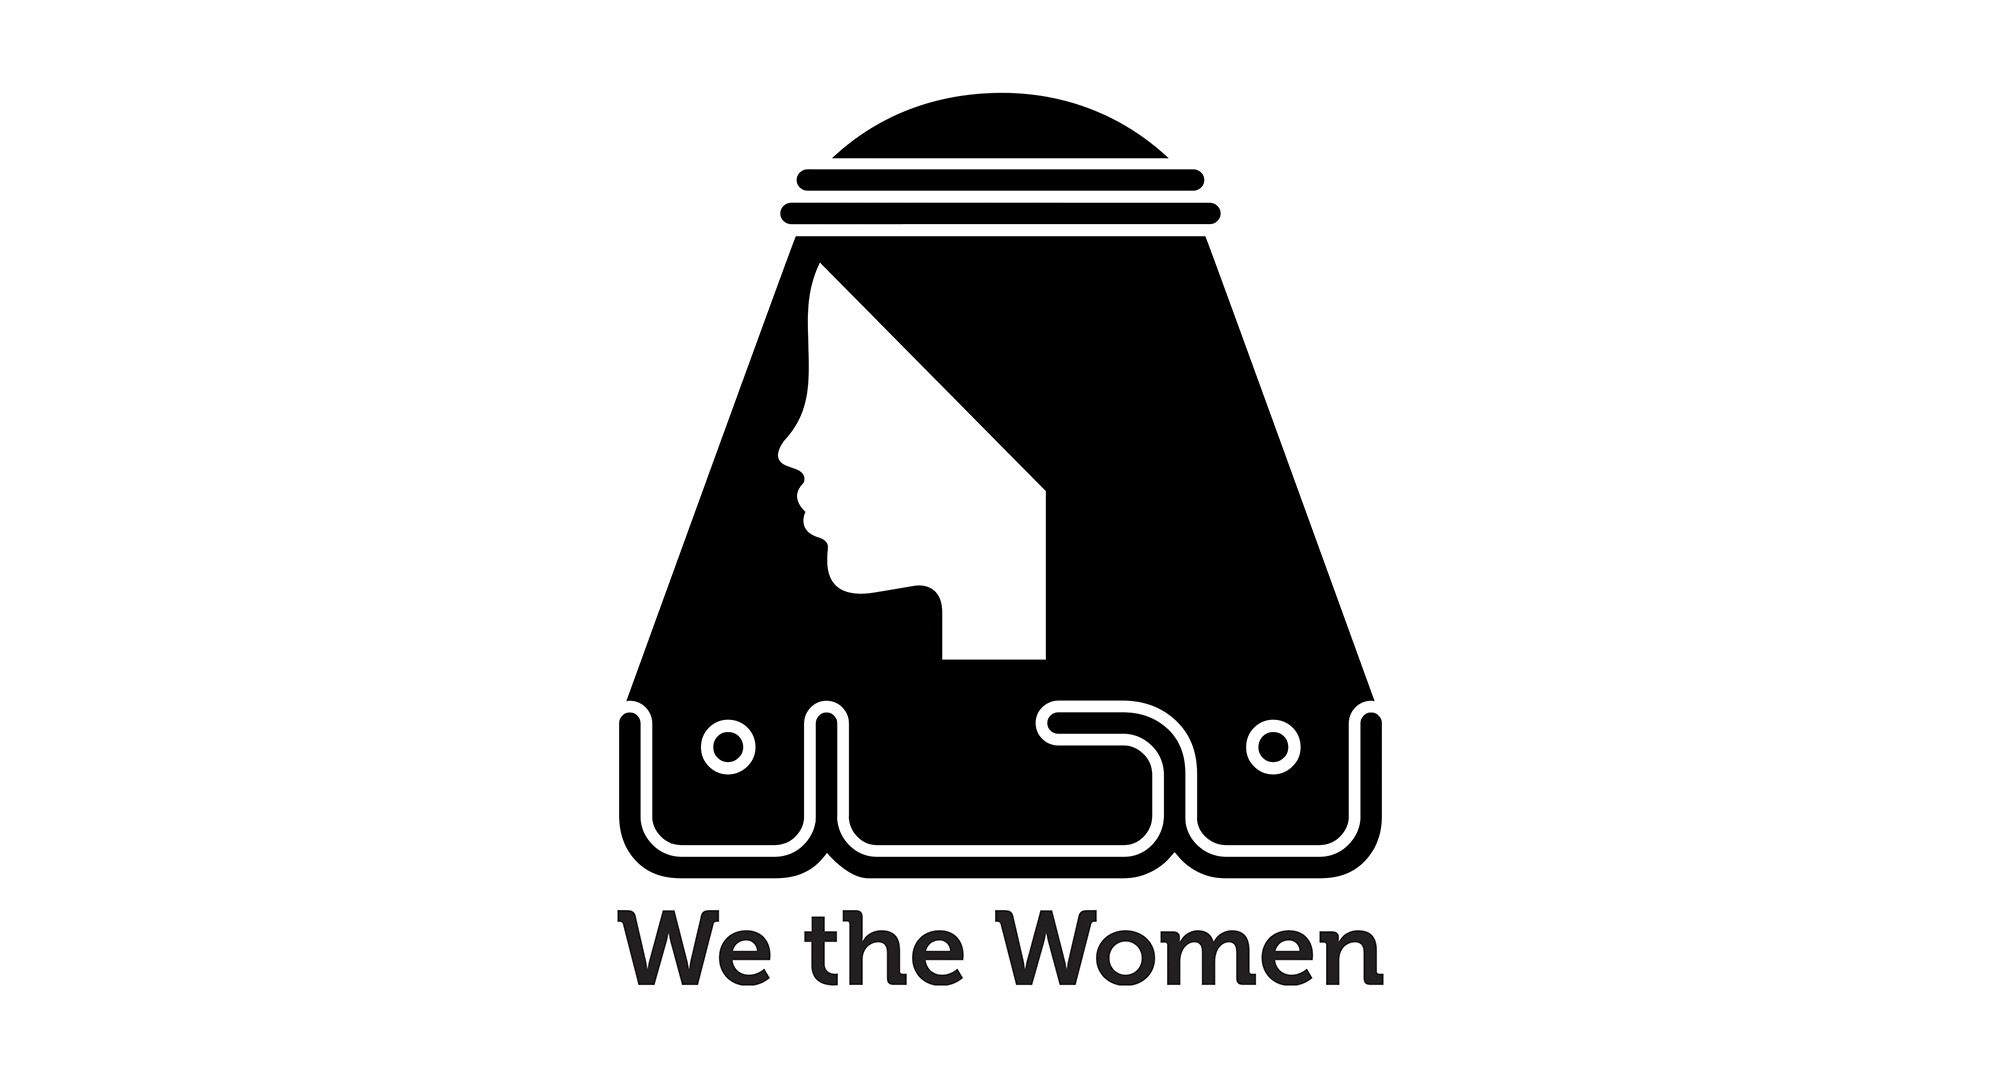 A logo of an Arab woman's face. The text on the logo is: We The Women.